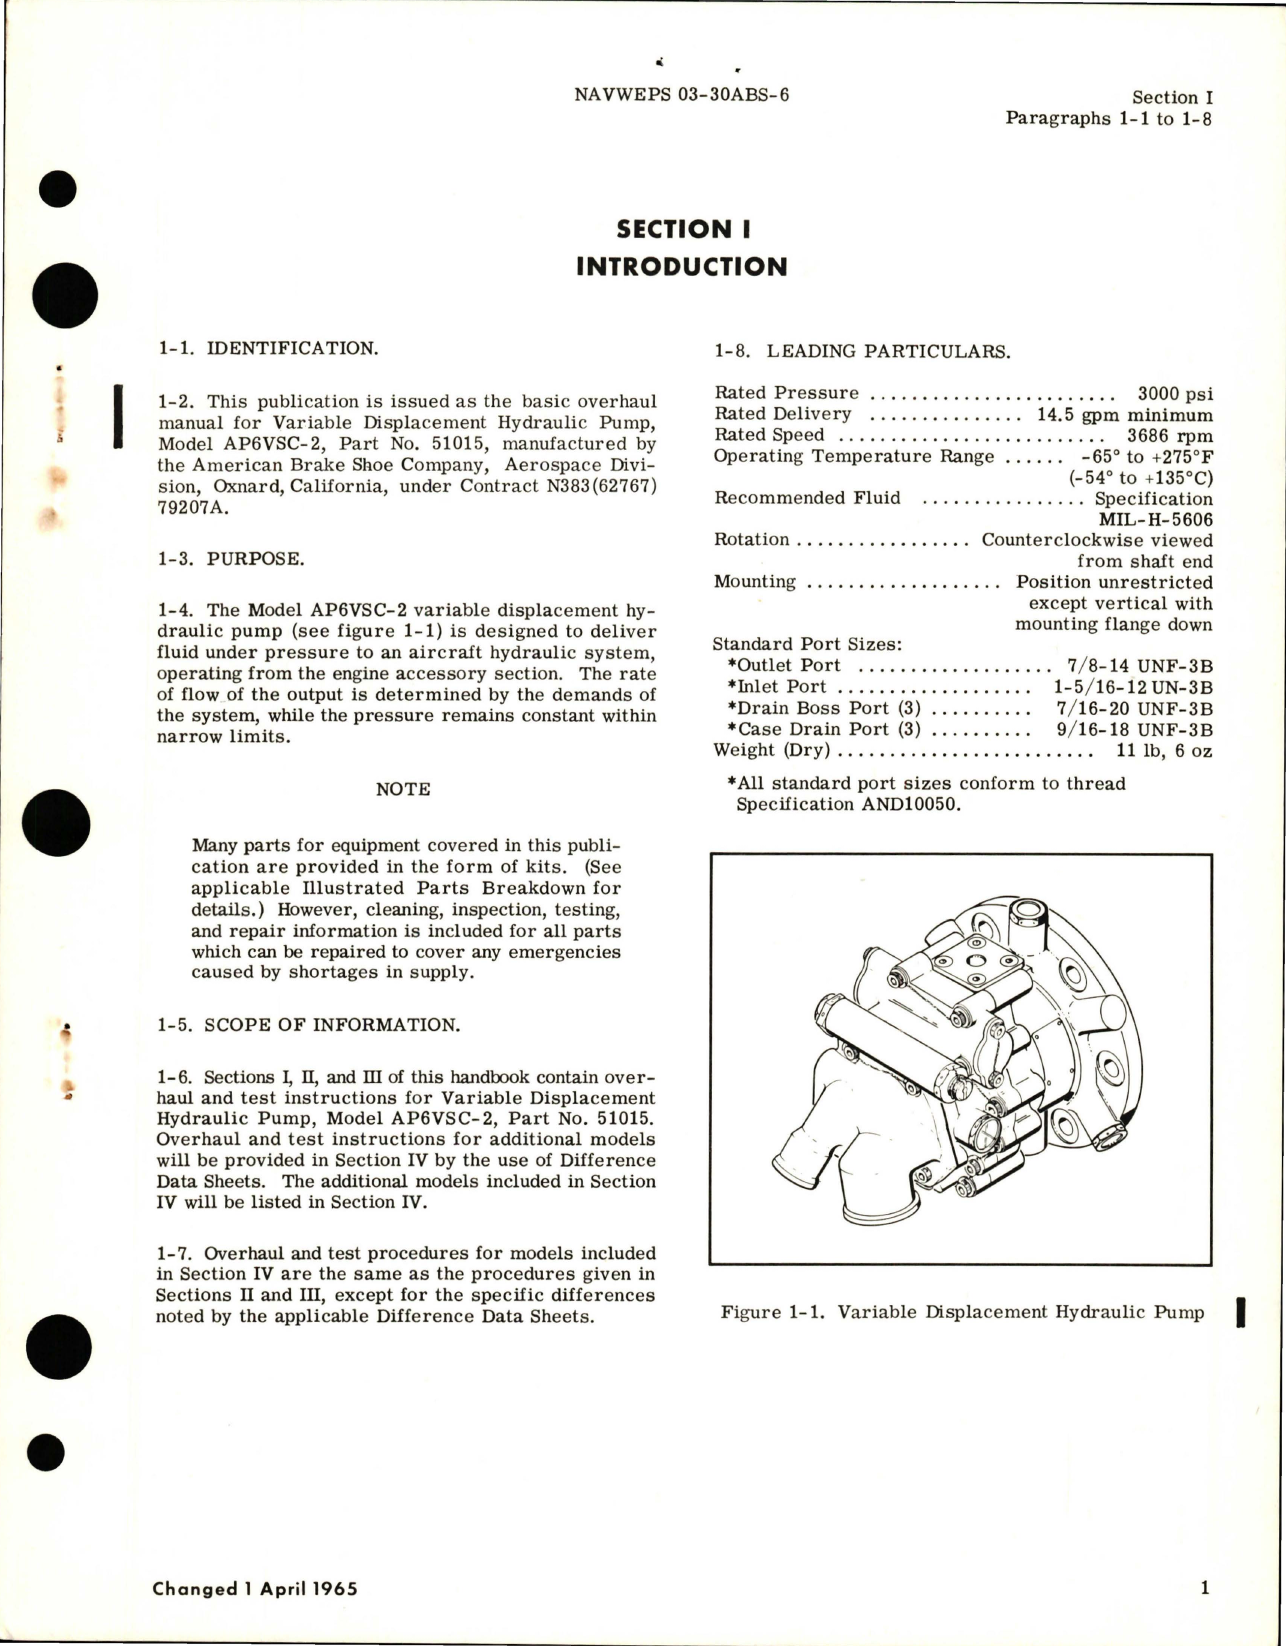 Sample page 5 from AirCorps Library document: Overhaul Instructions for Variable Displacement Hydraulic Pump - Model AP6VSC-2 and AP6VSC-16 - Parts 51015 and 51054